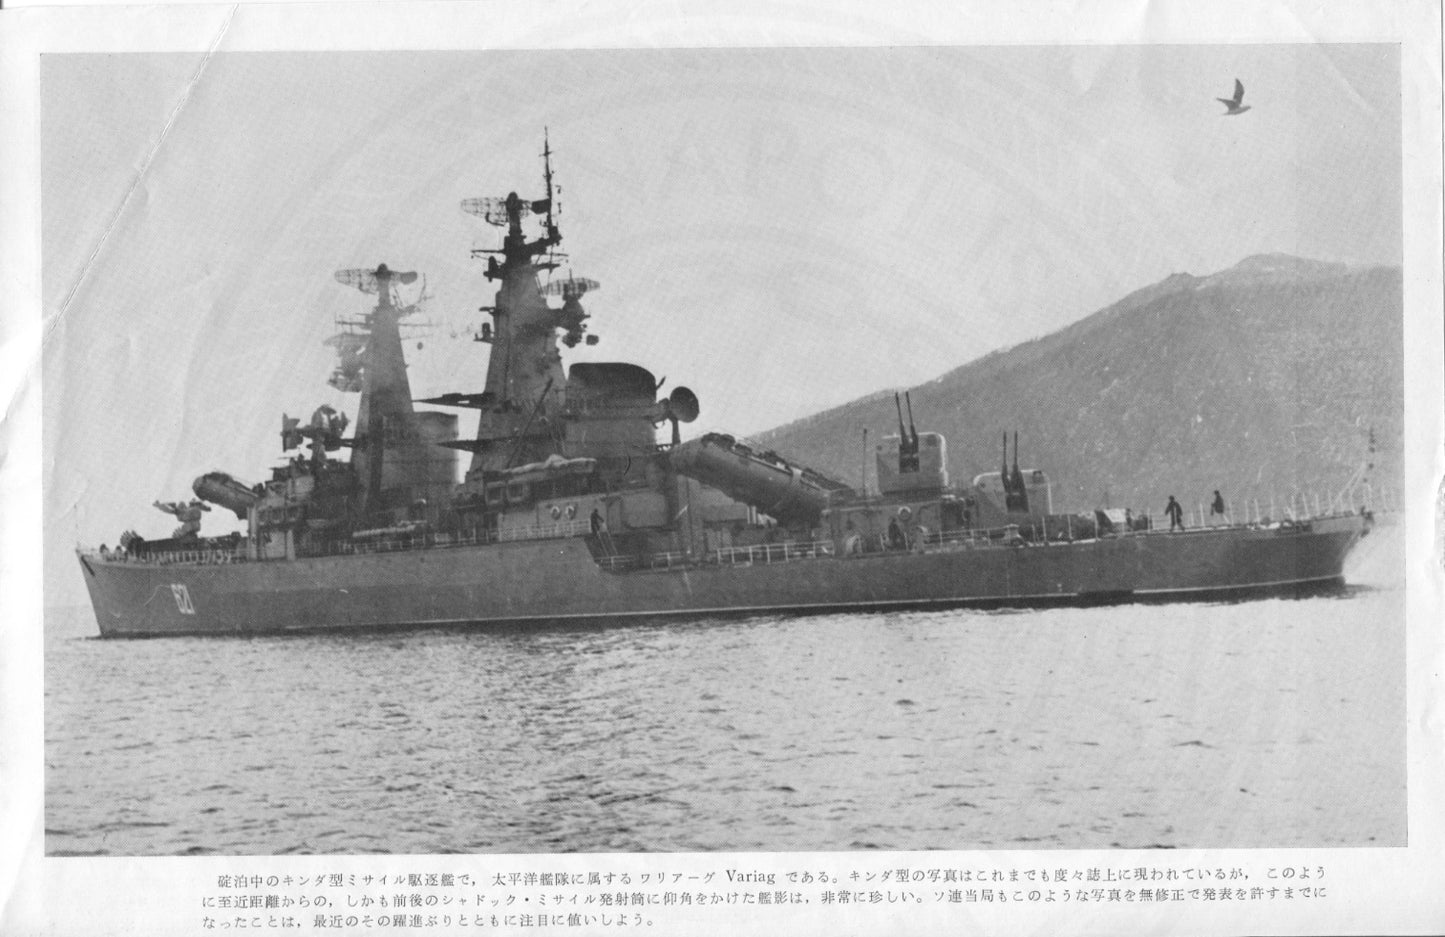 Official U.S. Navy photo the Soviet missile cruiser Kynda class - Annapolis Maritime Antiques